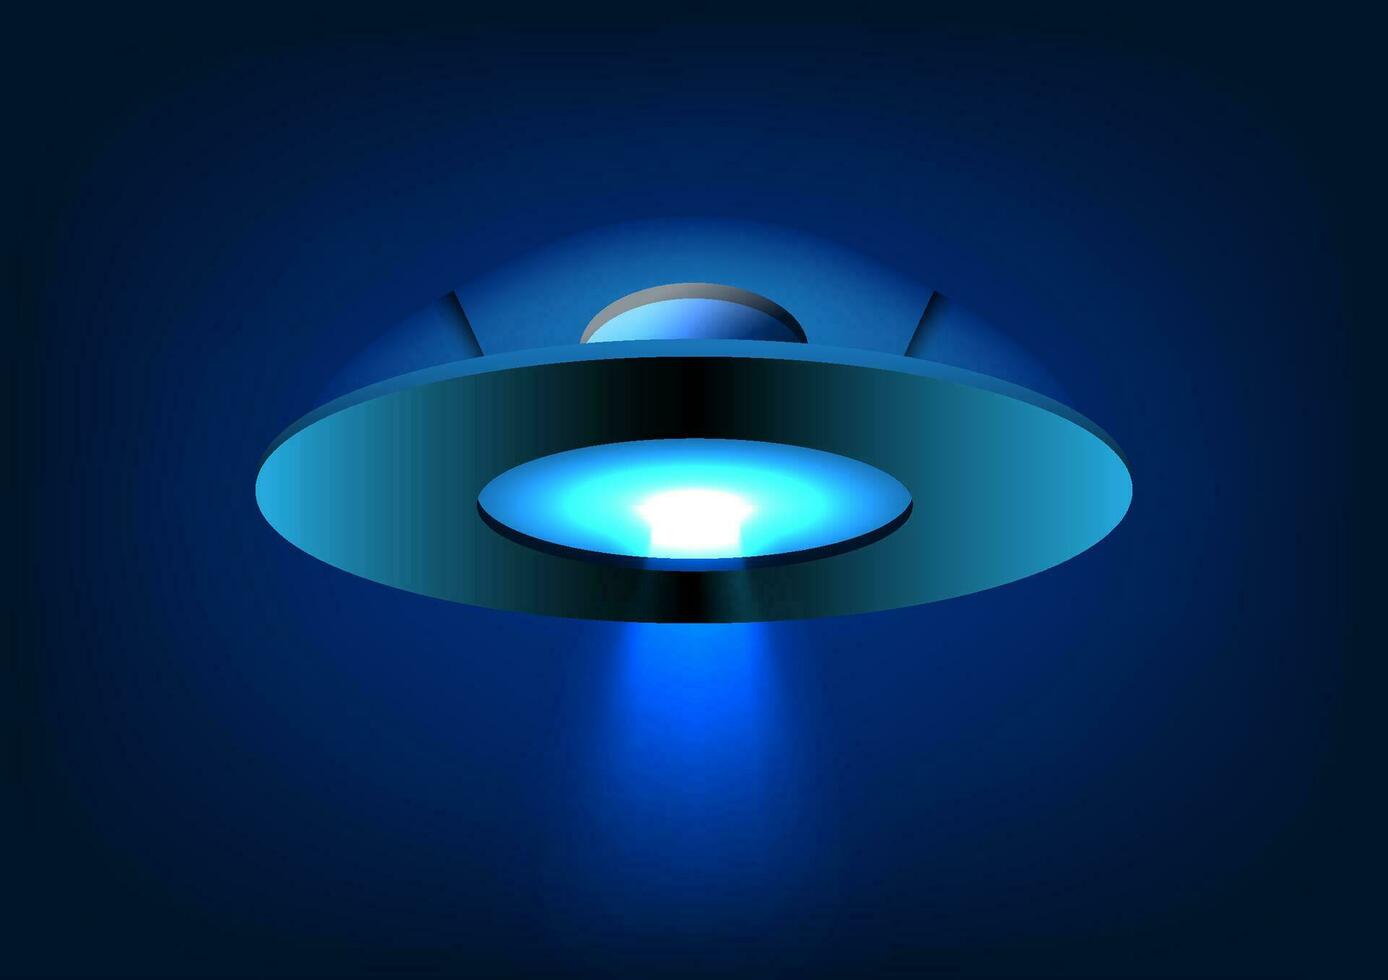 UFO spaceship A beam of white light came out from the spacecraft. is a vector image Suitable for use as a decorative poster or as an illustration